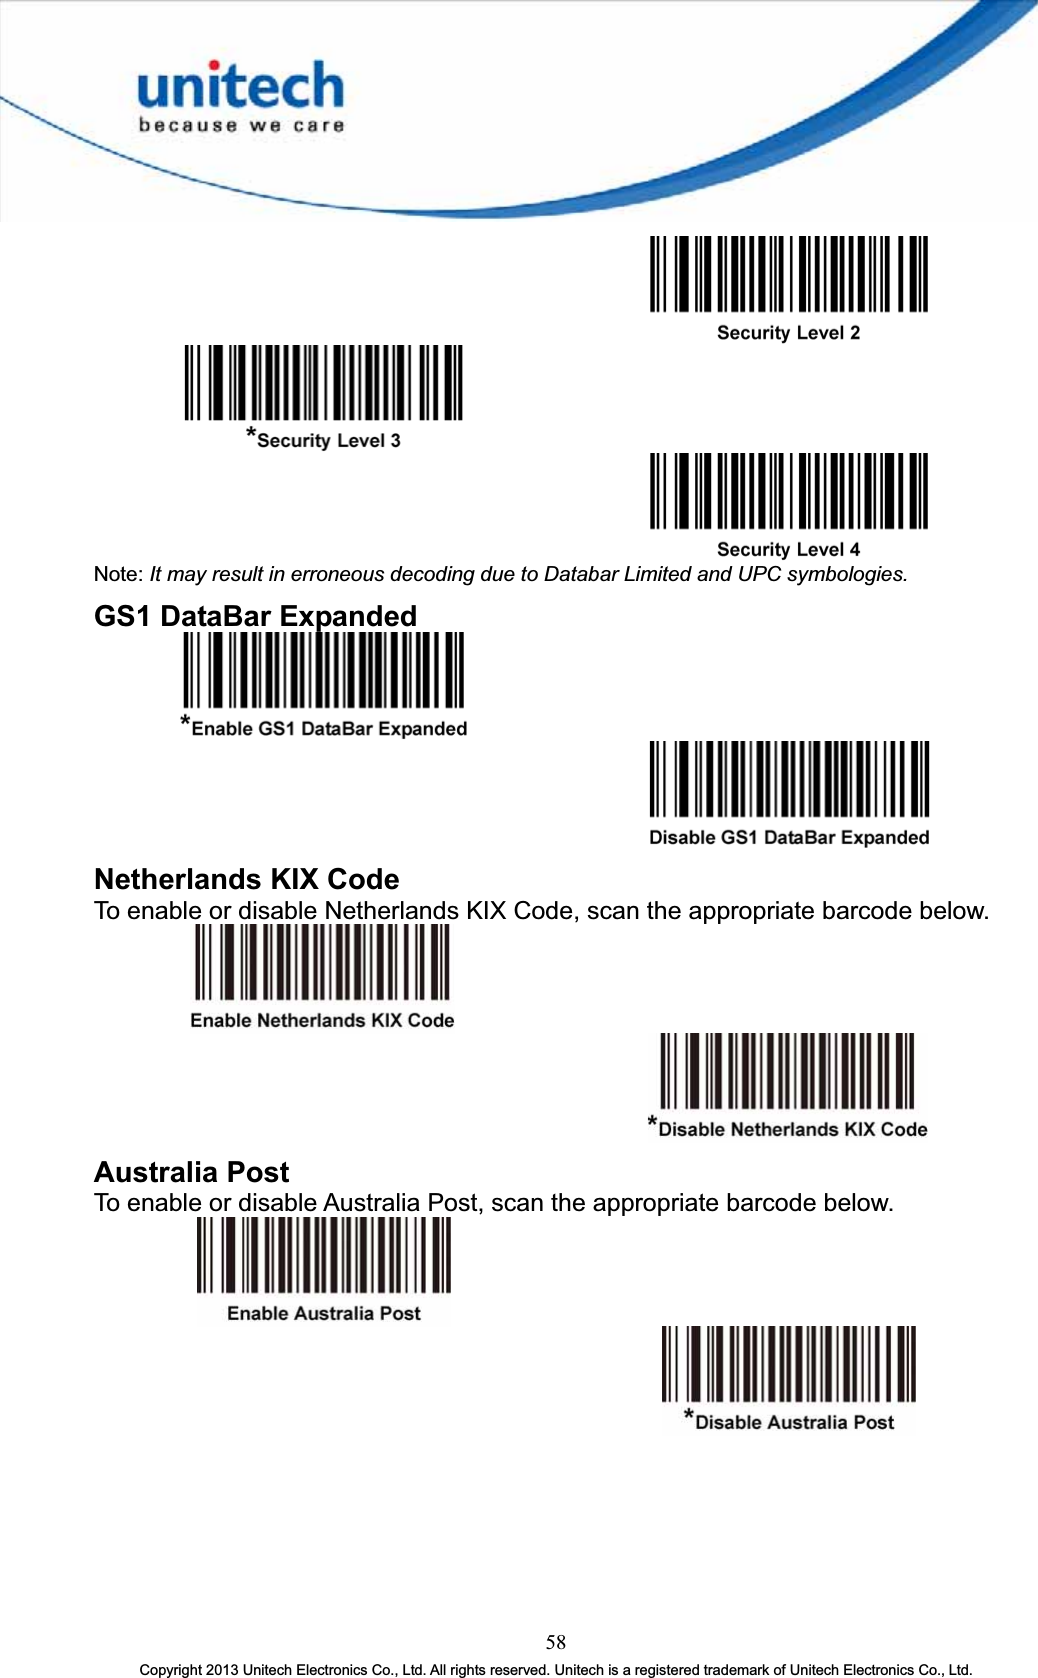 Note: It may result in erroneous decoding due to Databar Limited and UPC symbologies.GS1 DataBar Expanded Netherlands KIX Code To enable or disable Netherlands KIX Code, scan the appropriate barcode below. Australia Post To enable or disable Australia Post, scan the appropriate barcode below. 58Copyright 2013 Unitech Electronics Co., Ltd. All rights reserved. Unitech is a registered trademark of Unitech Electronics Co., Ltd. 